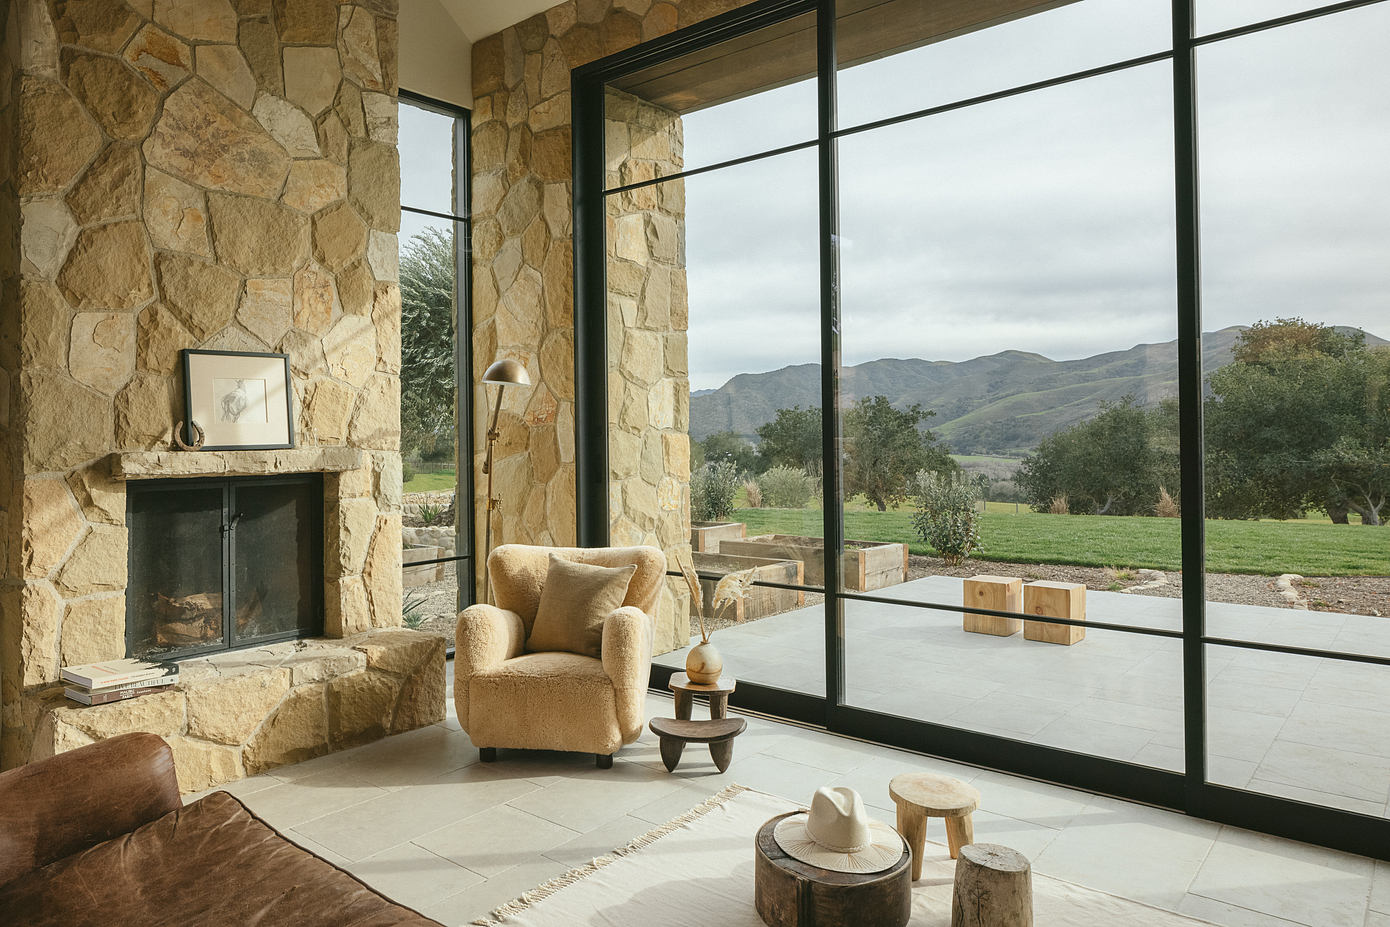 Ranch House: Honoring Local Heritage with Limestone & Sandstone